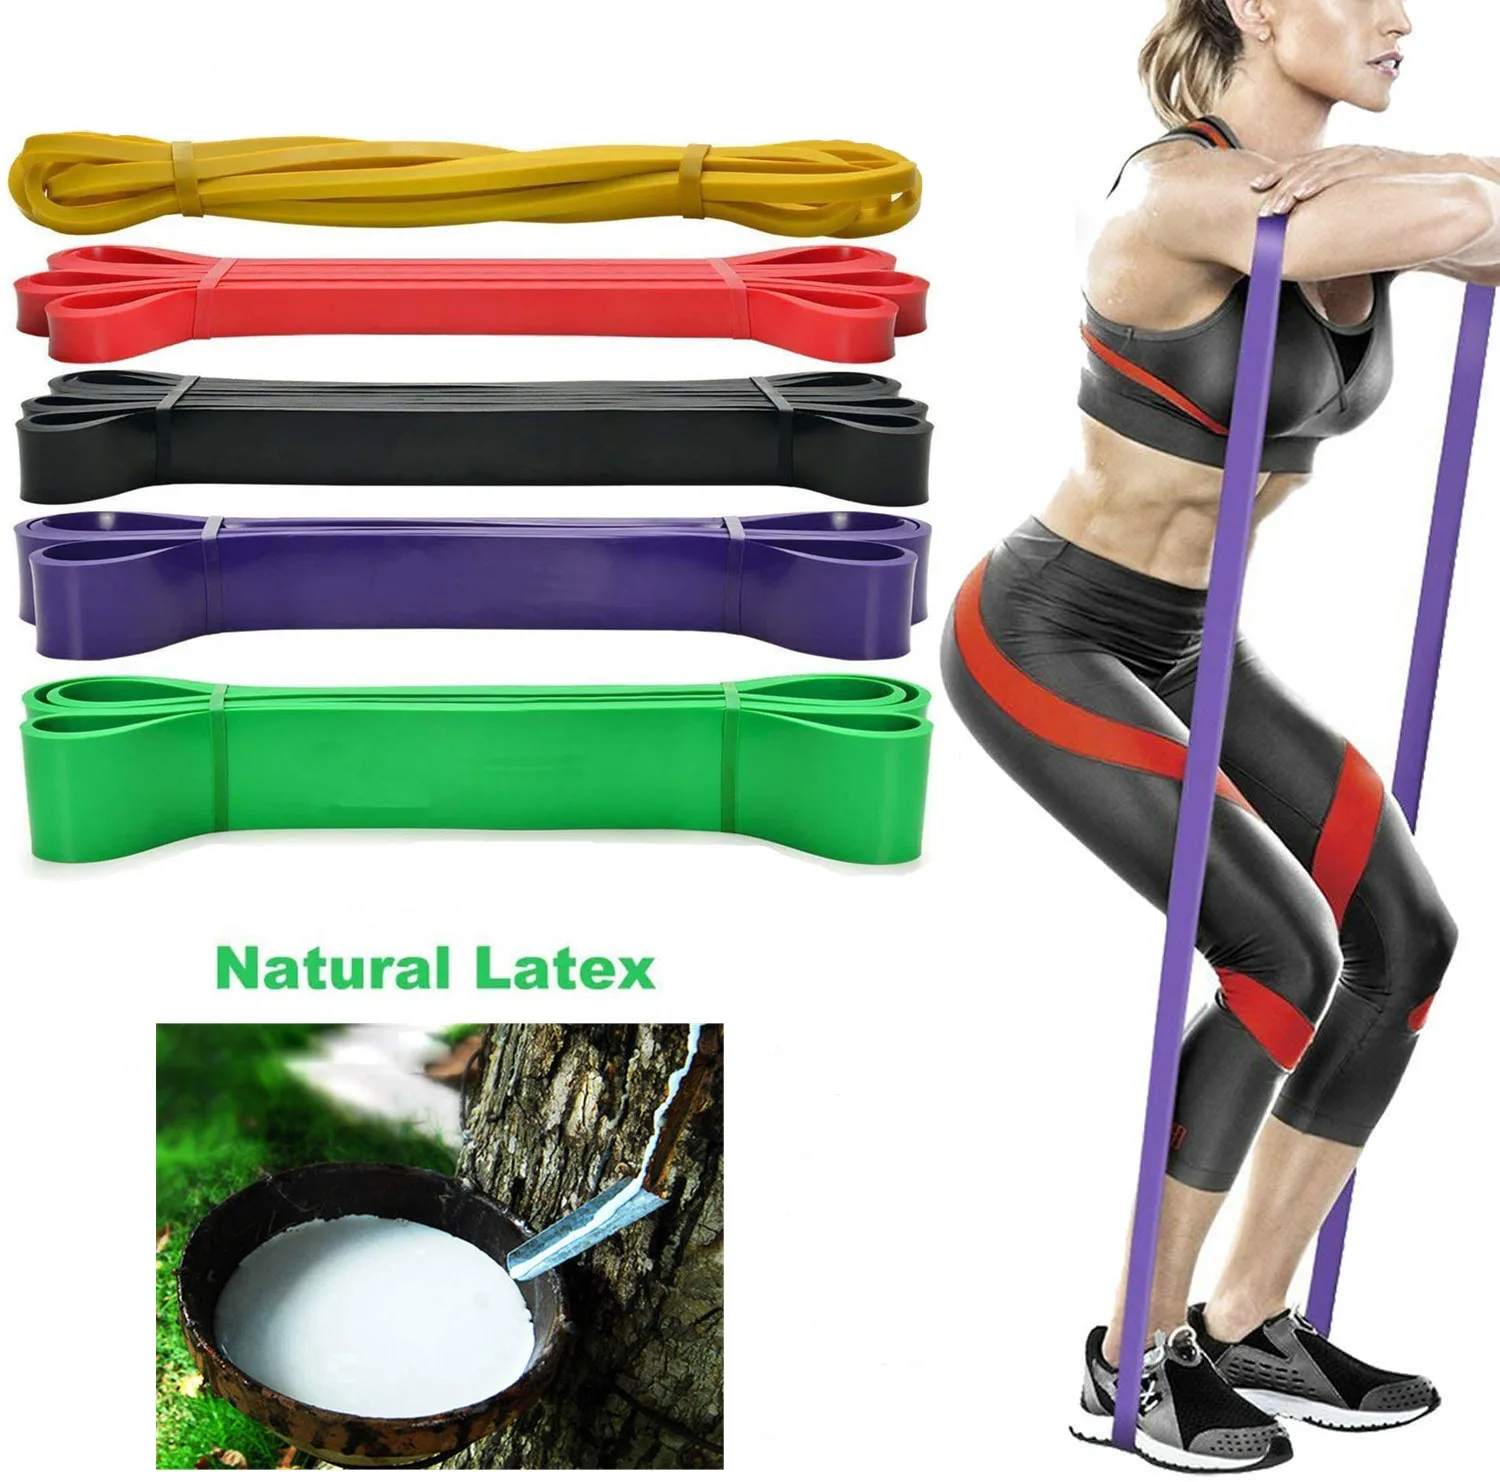 Exercise Bands Resistance Bands Yoga and Mobility Bands Pull up bands 